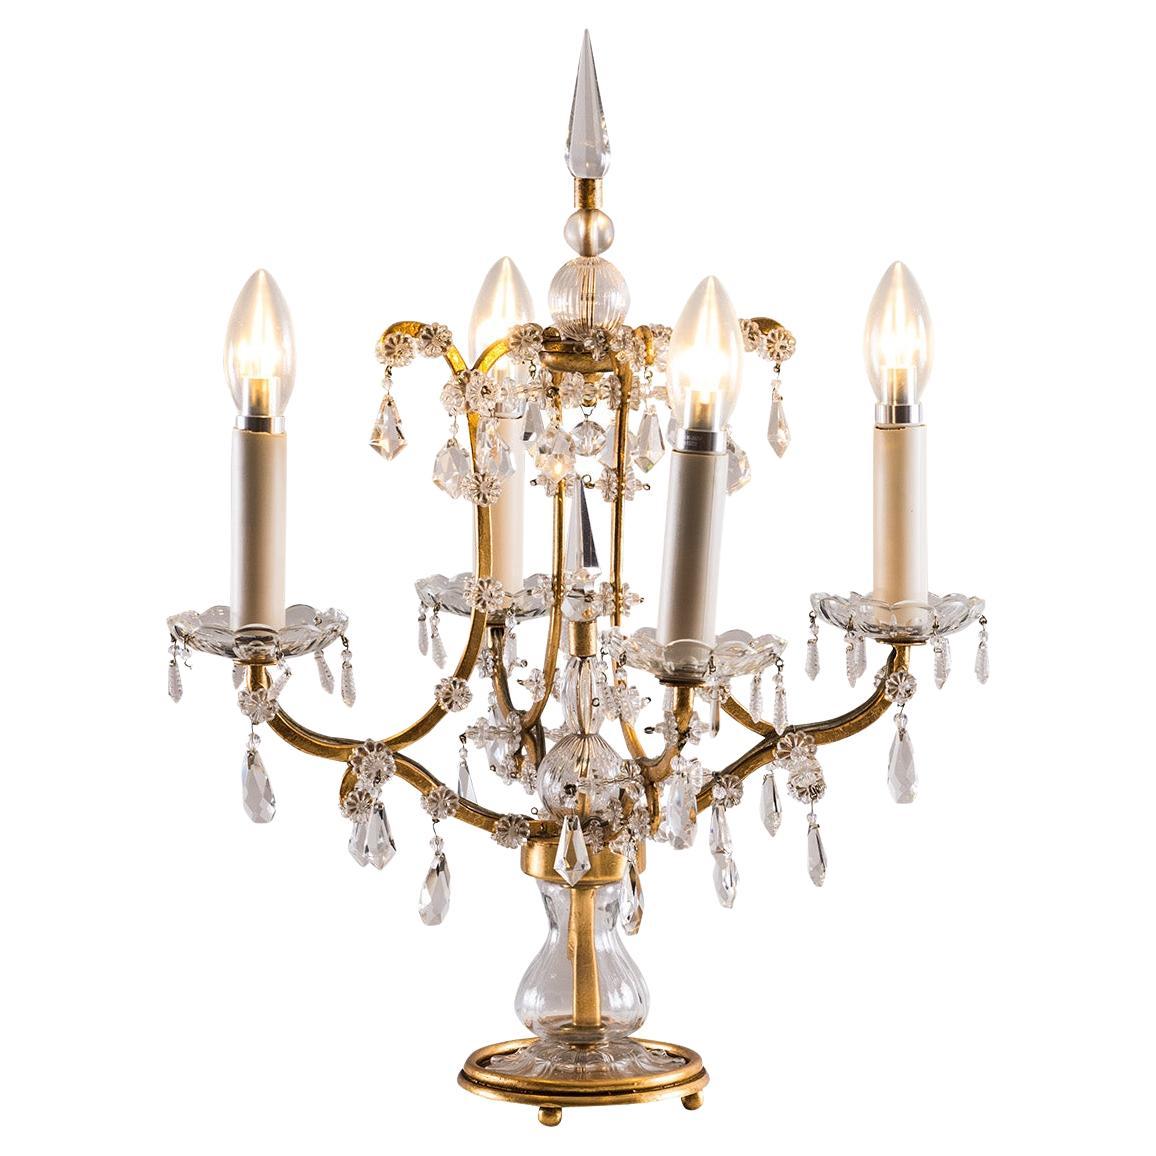 Original from 1905 Maria Theresien style Candelabra Table Lamp For Sale